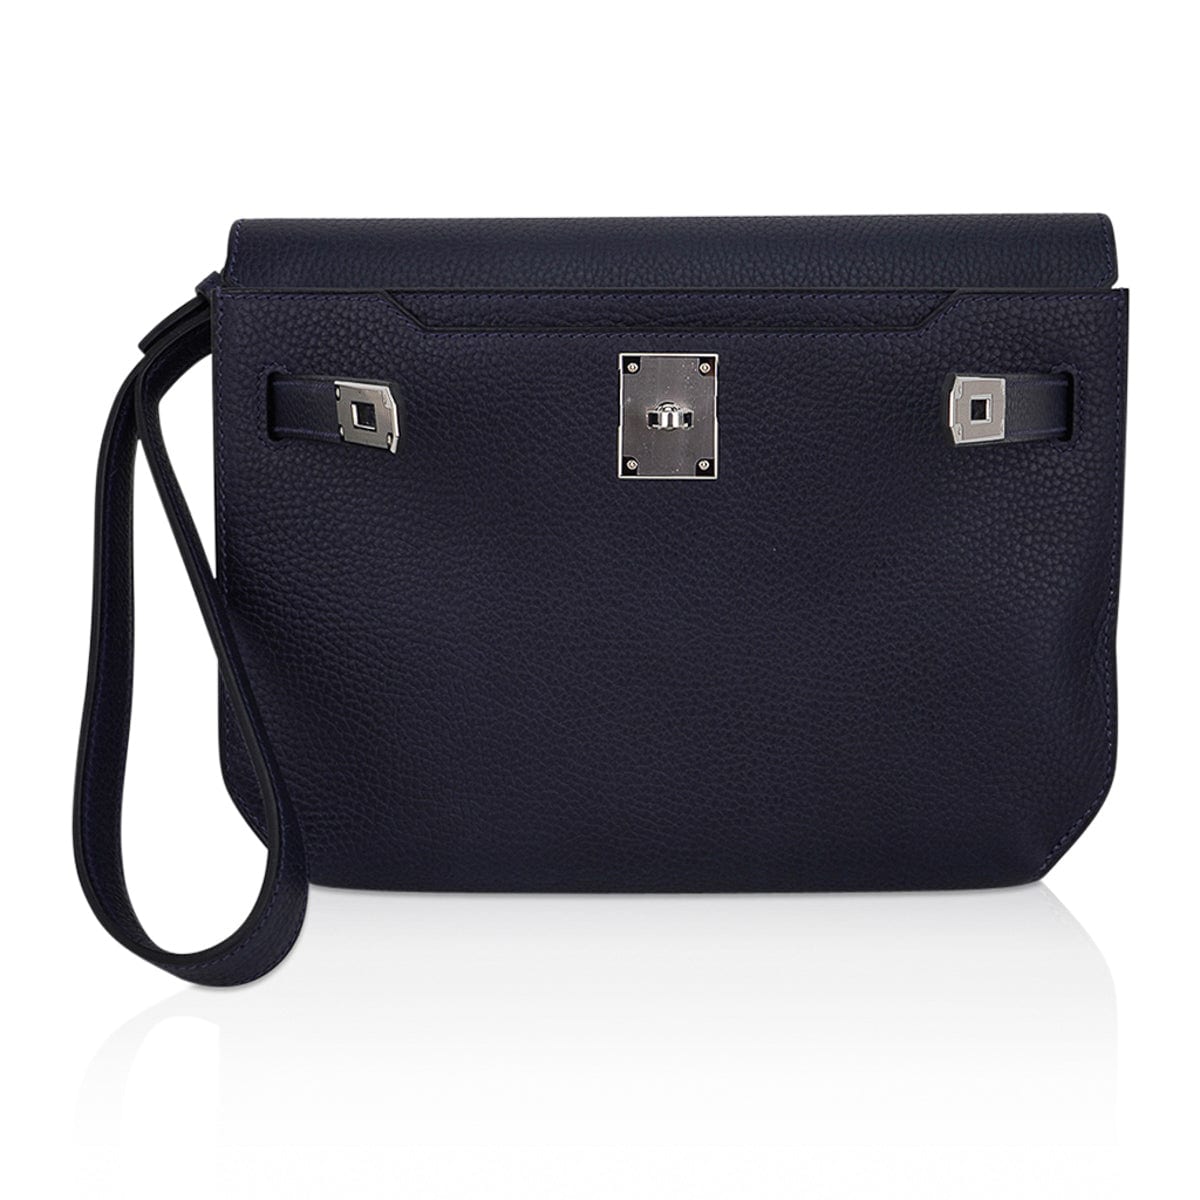 Kelly Depeches 25 Pouch in Togo Leather, Palladium Hardware